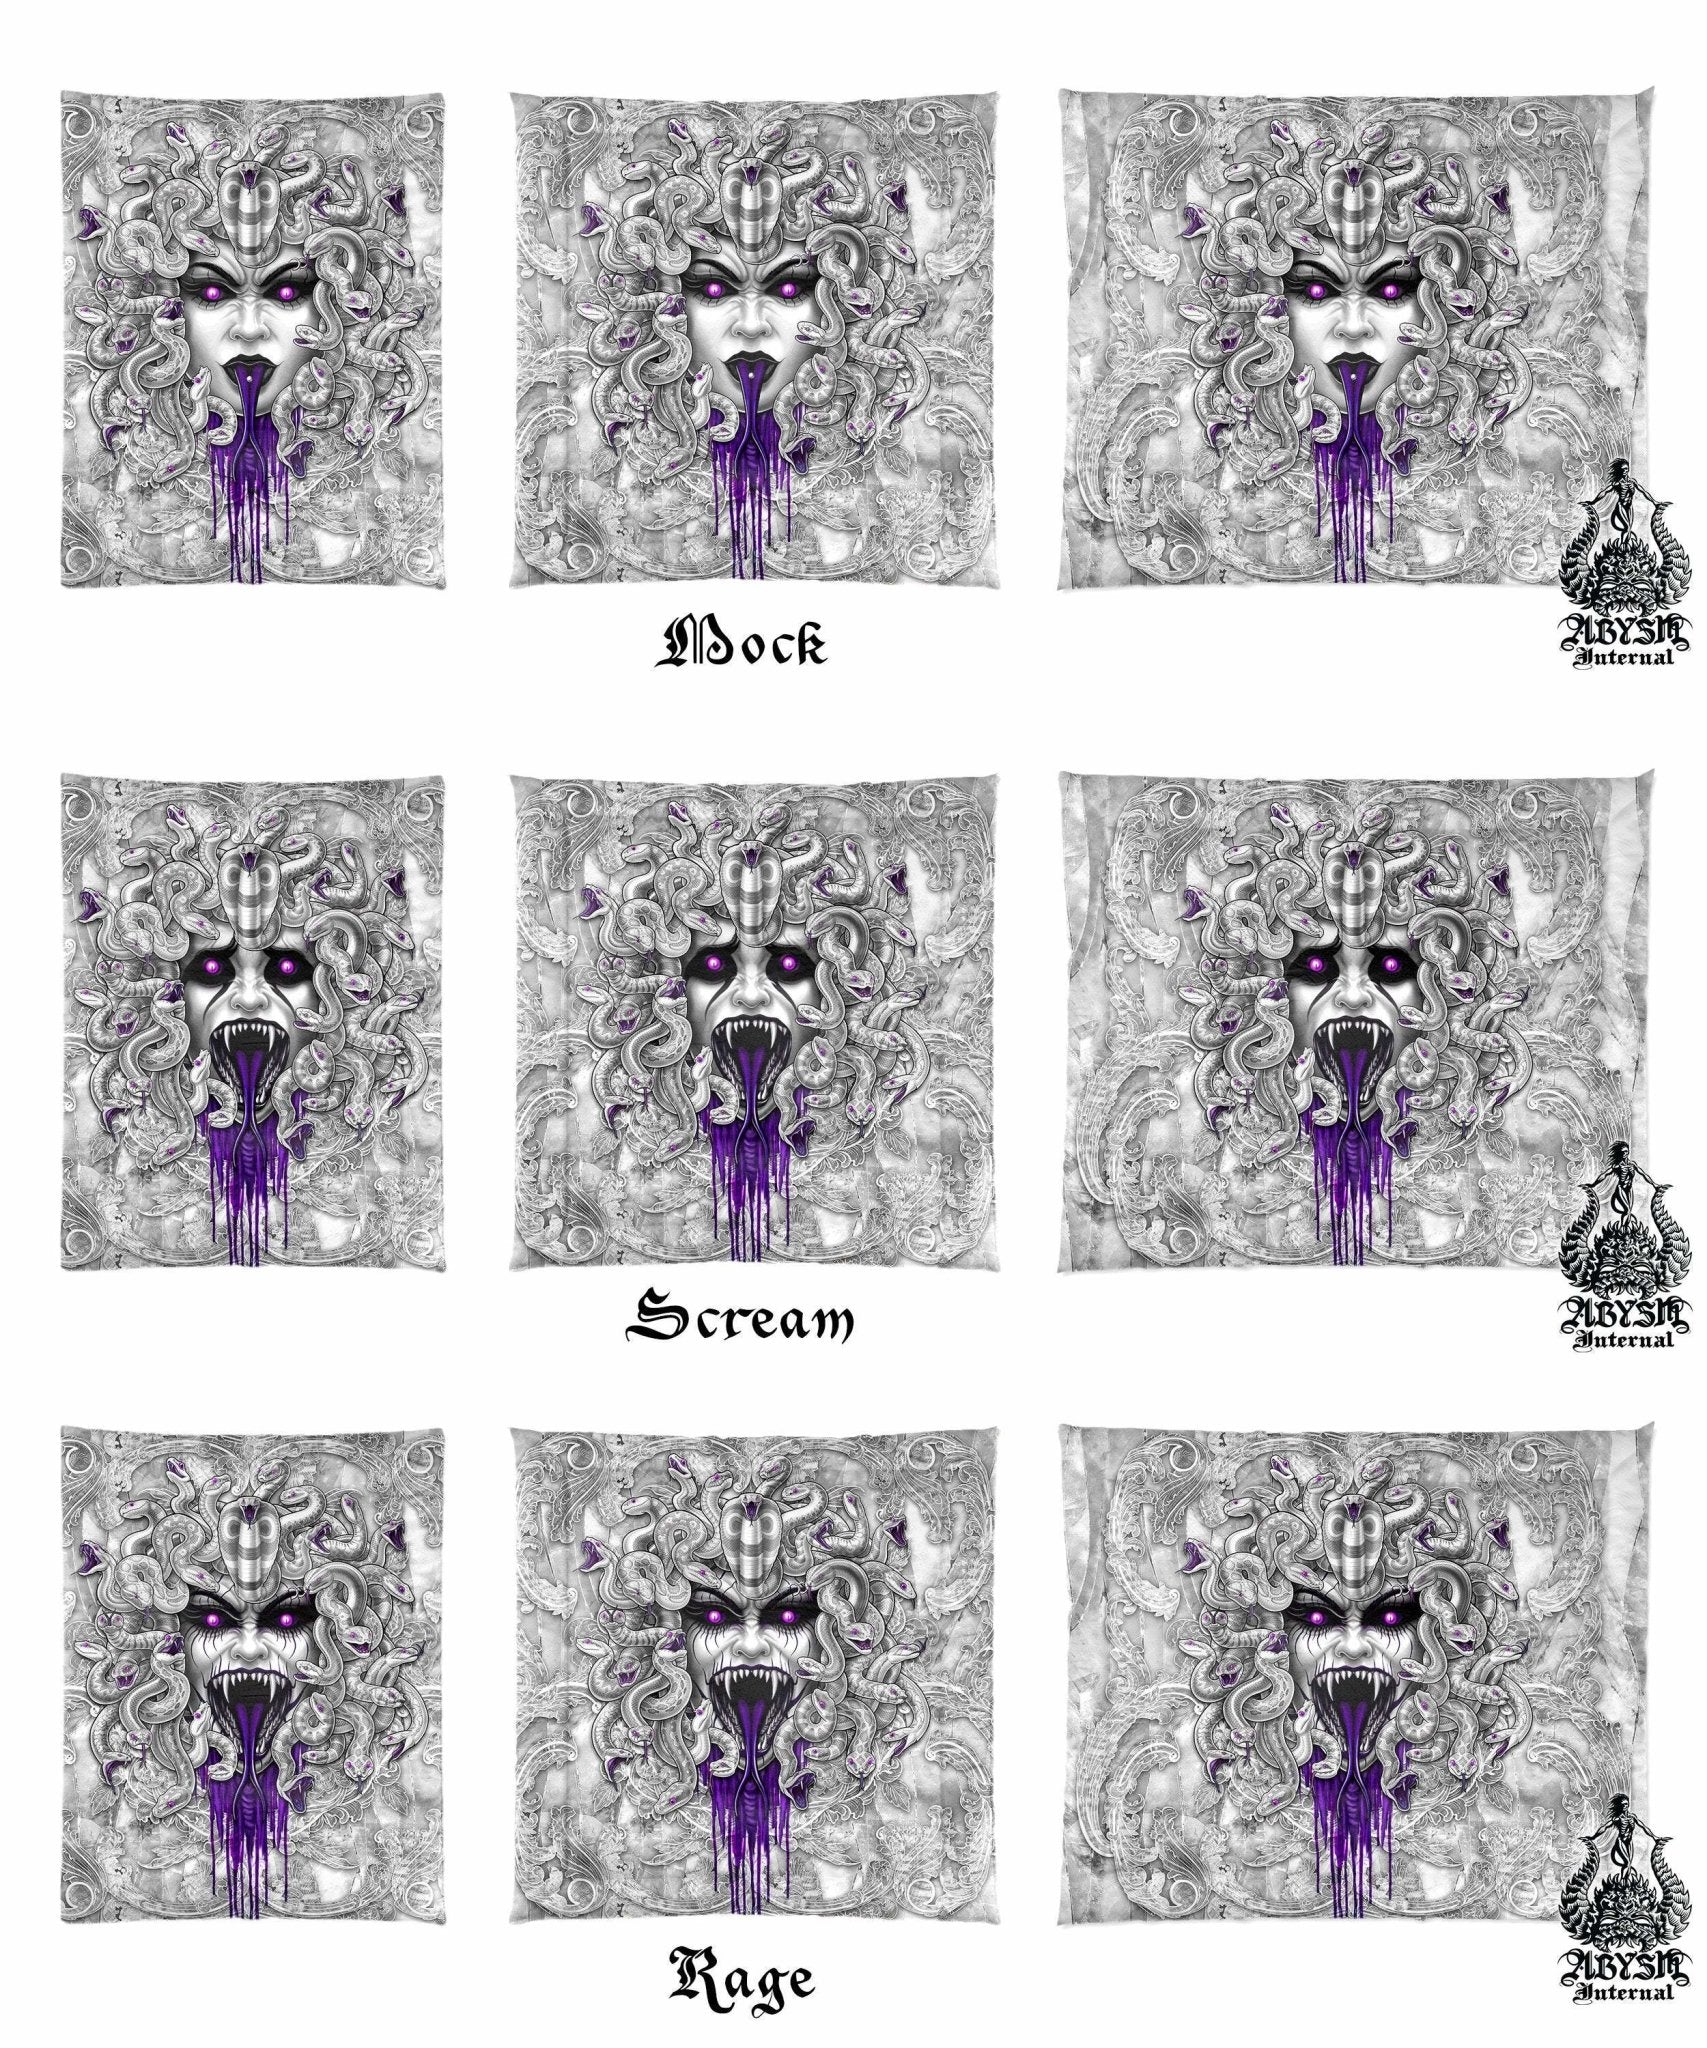 White Goth Bedding Set, Comforter and Duvet, Gothic Bed Cover and Bedroom Decor, King, Queen and Twin Size - Purple, Medusa, 3 Faces - Abysm Internal